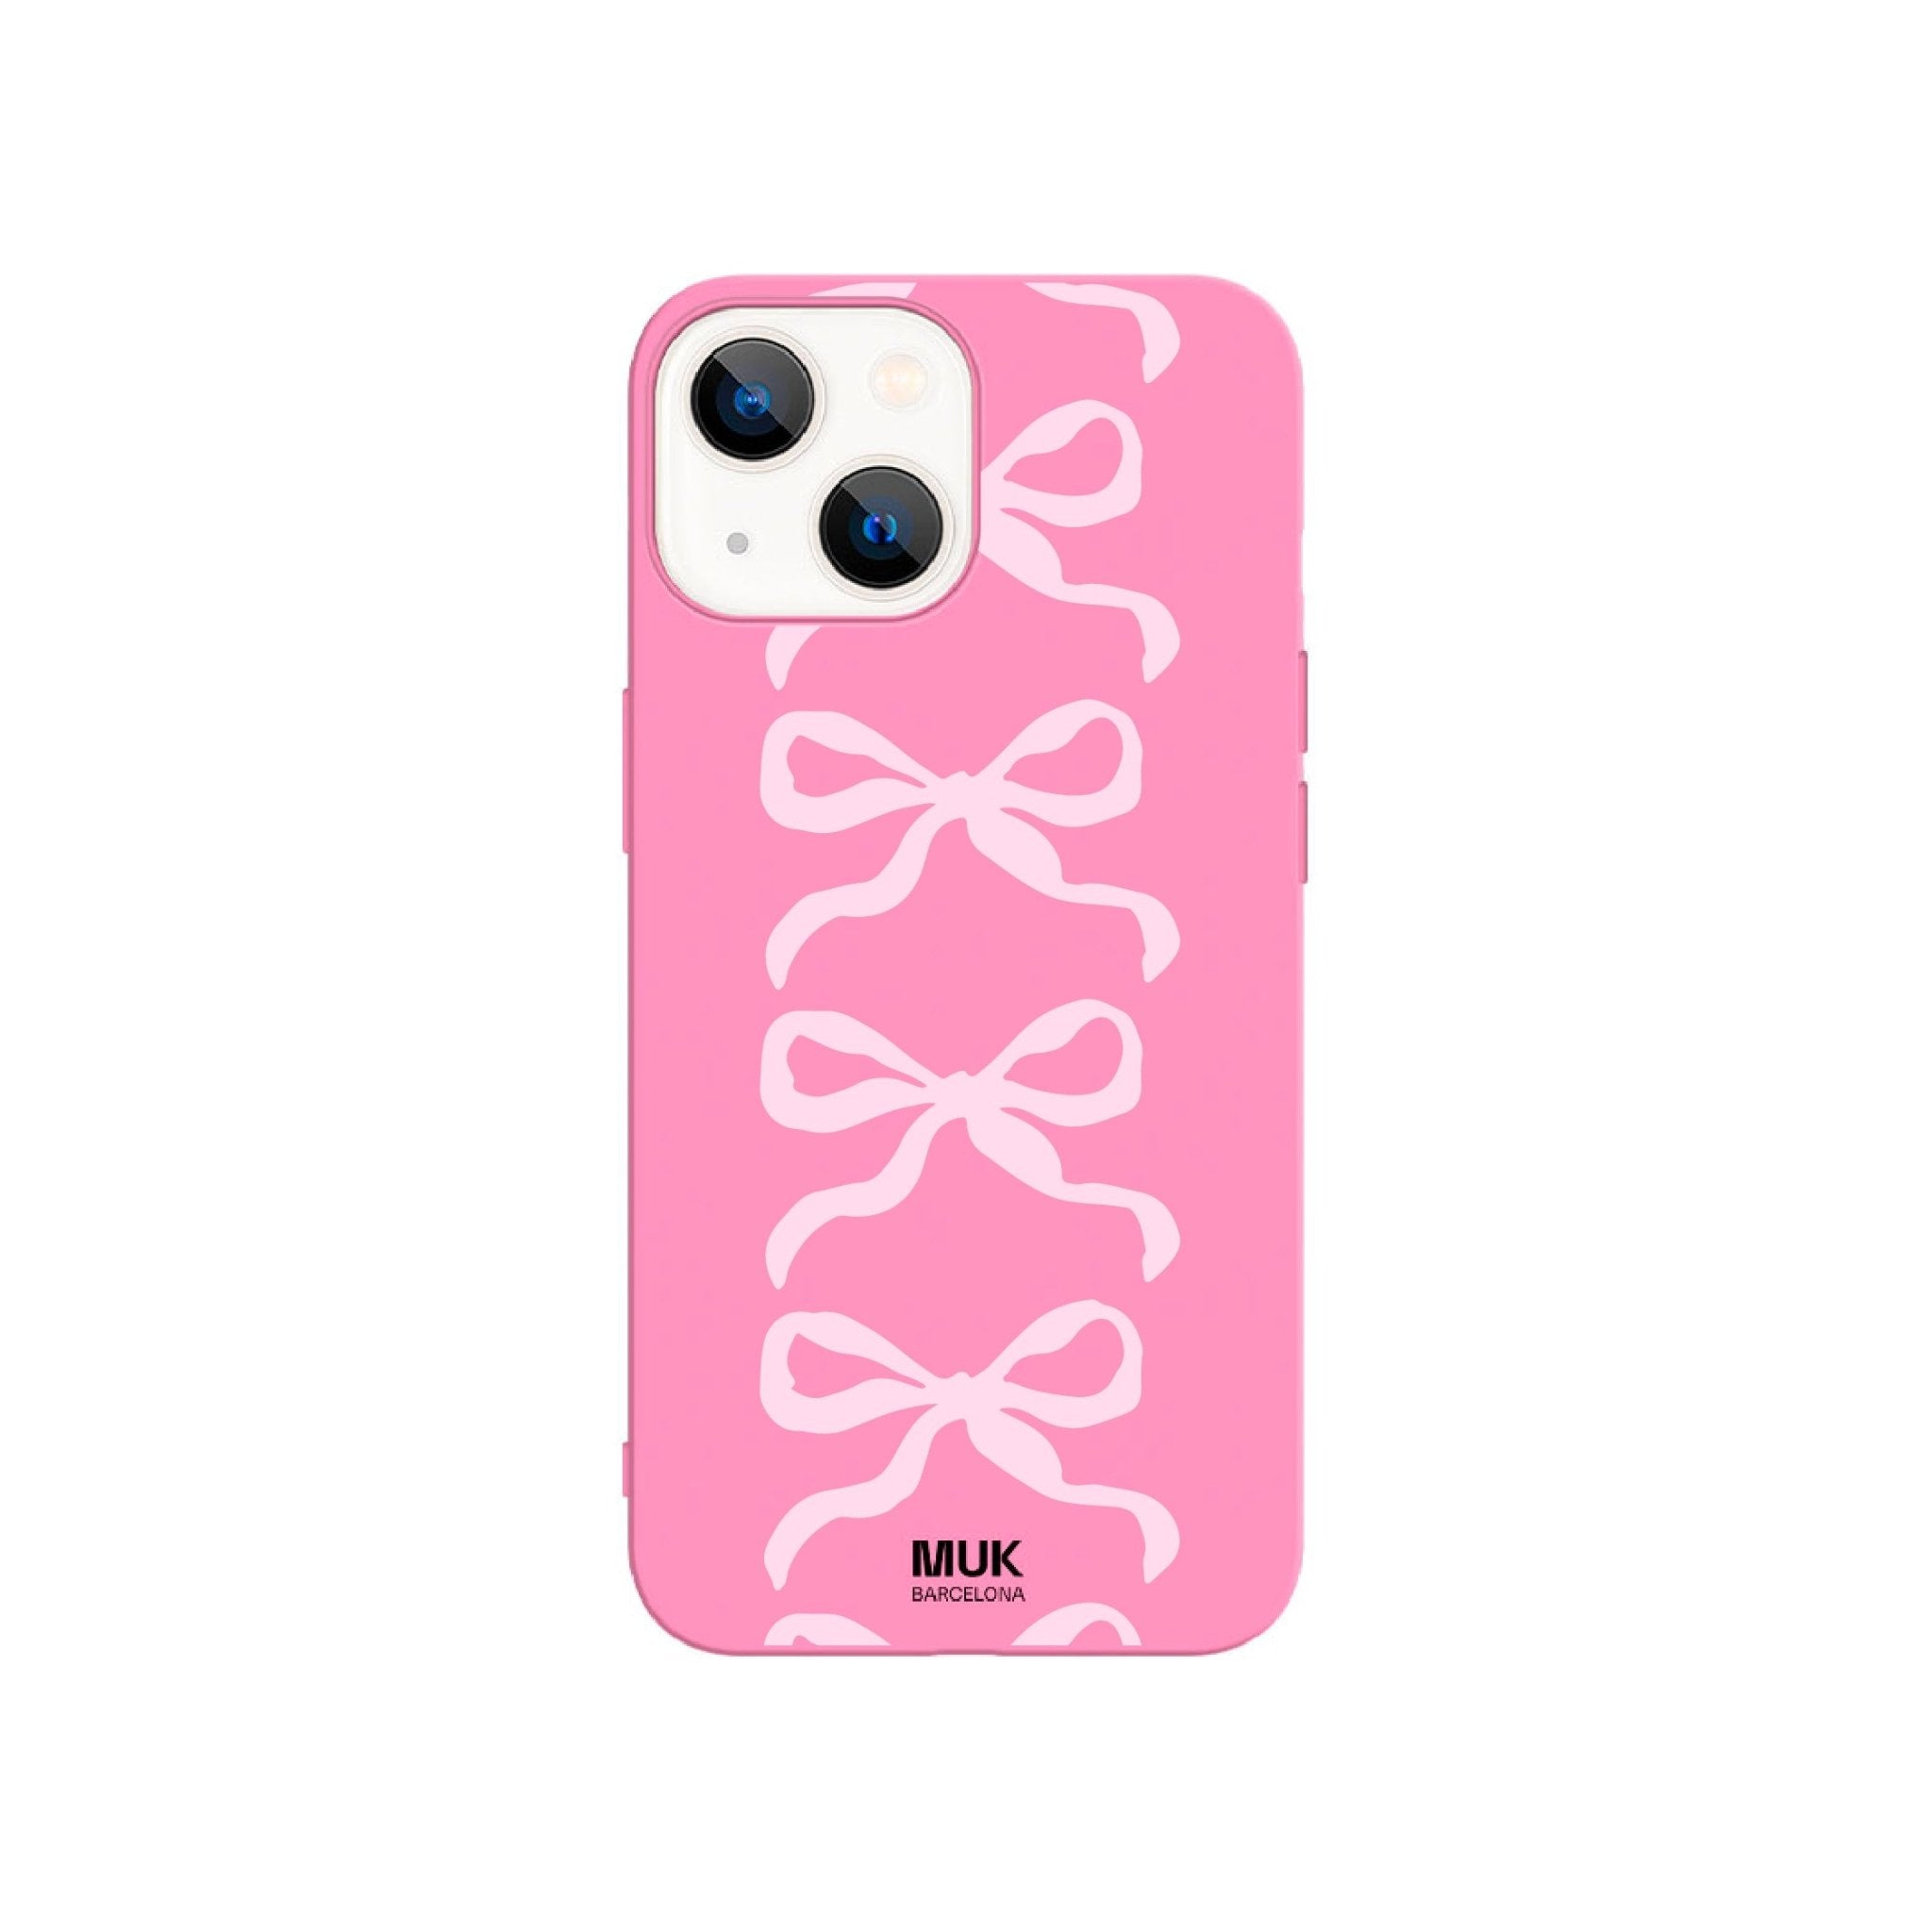 Pink TPU phone case with pale pink ribbons design
